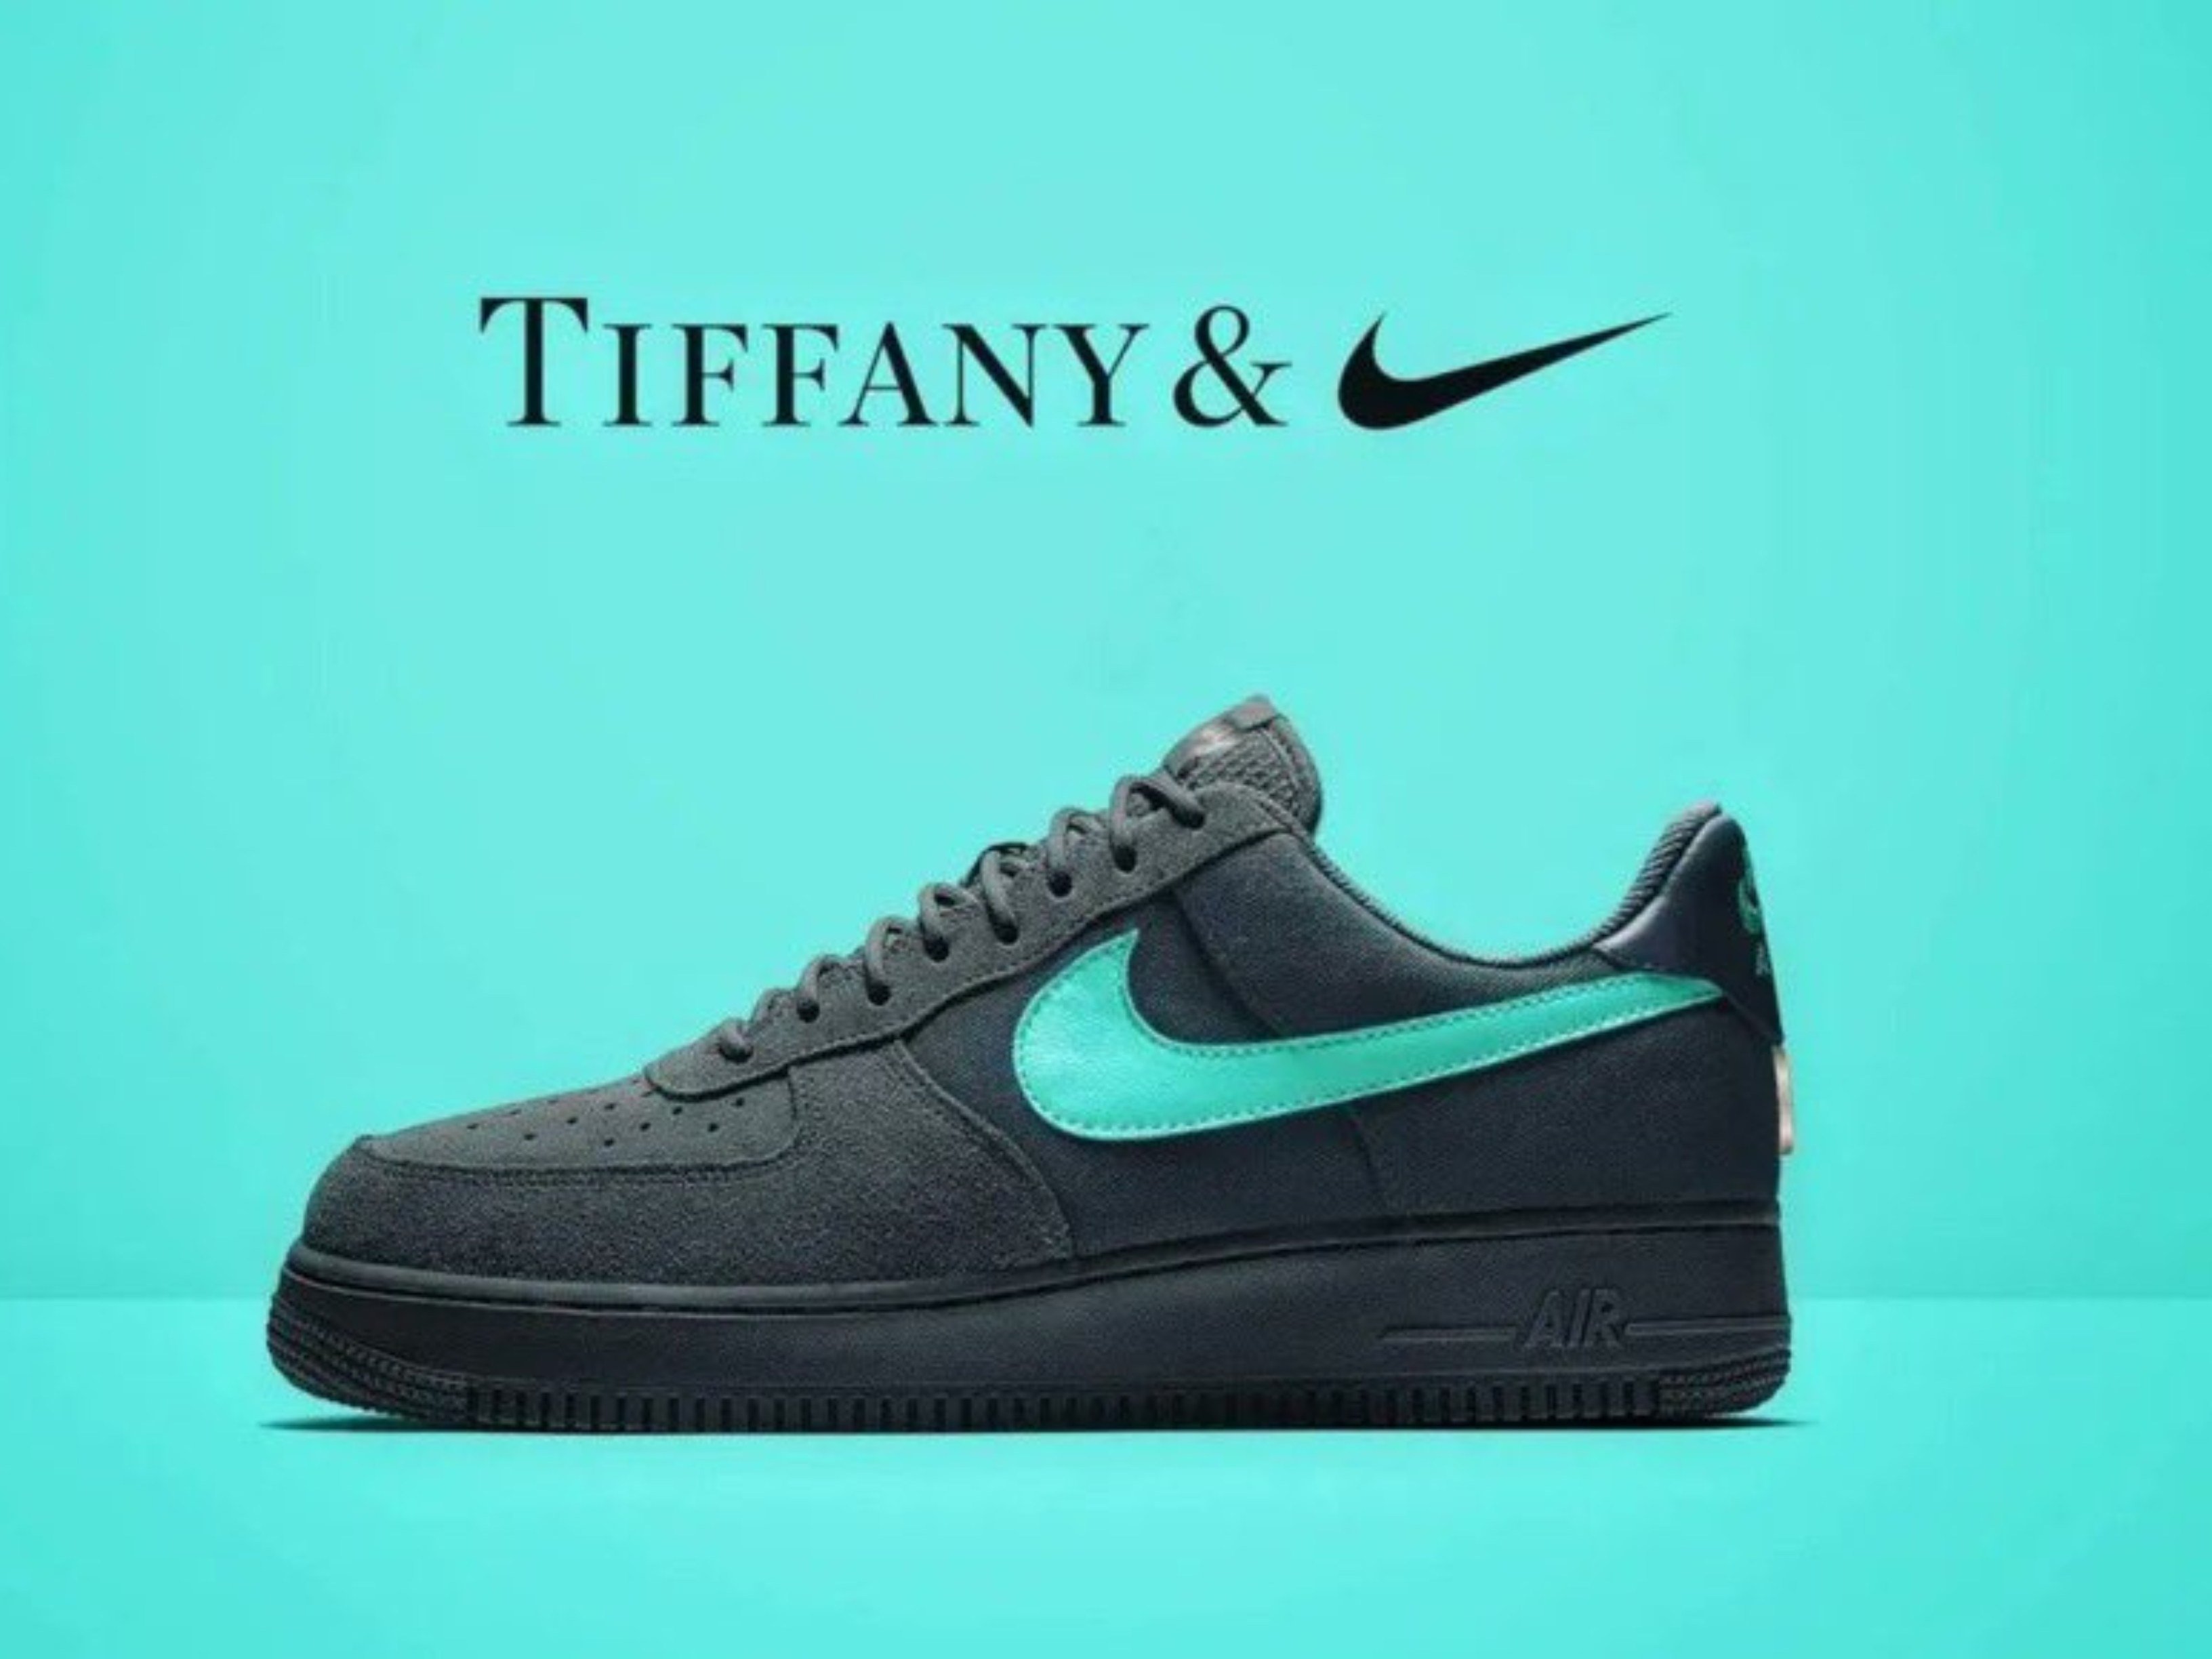 Nike and Tiffany & Co. to launch US$400 sneakers: the Air Force 1 '1837' limited-edition collaboration comes after the LVMH brand worked with Beyoncé and – but some are calling